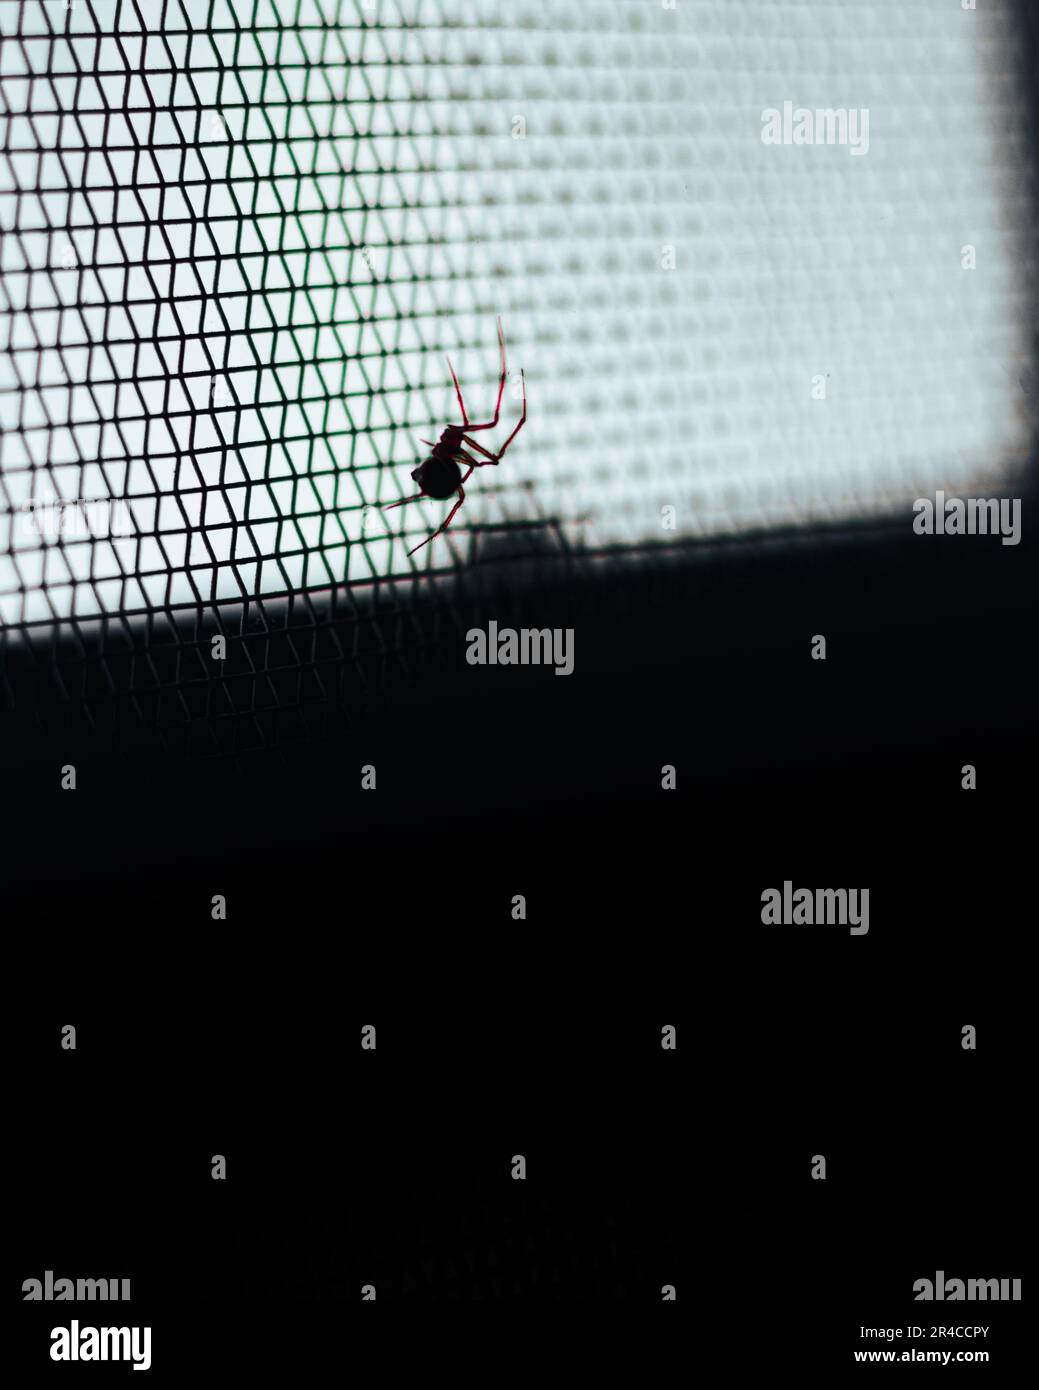 A vertical closeup of a spider walking on a metal net Stock Photo